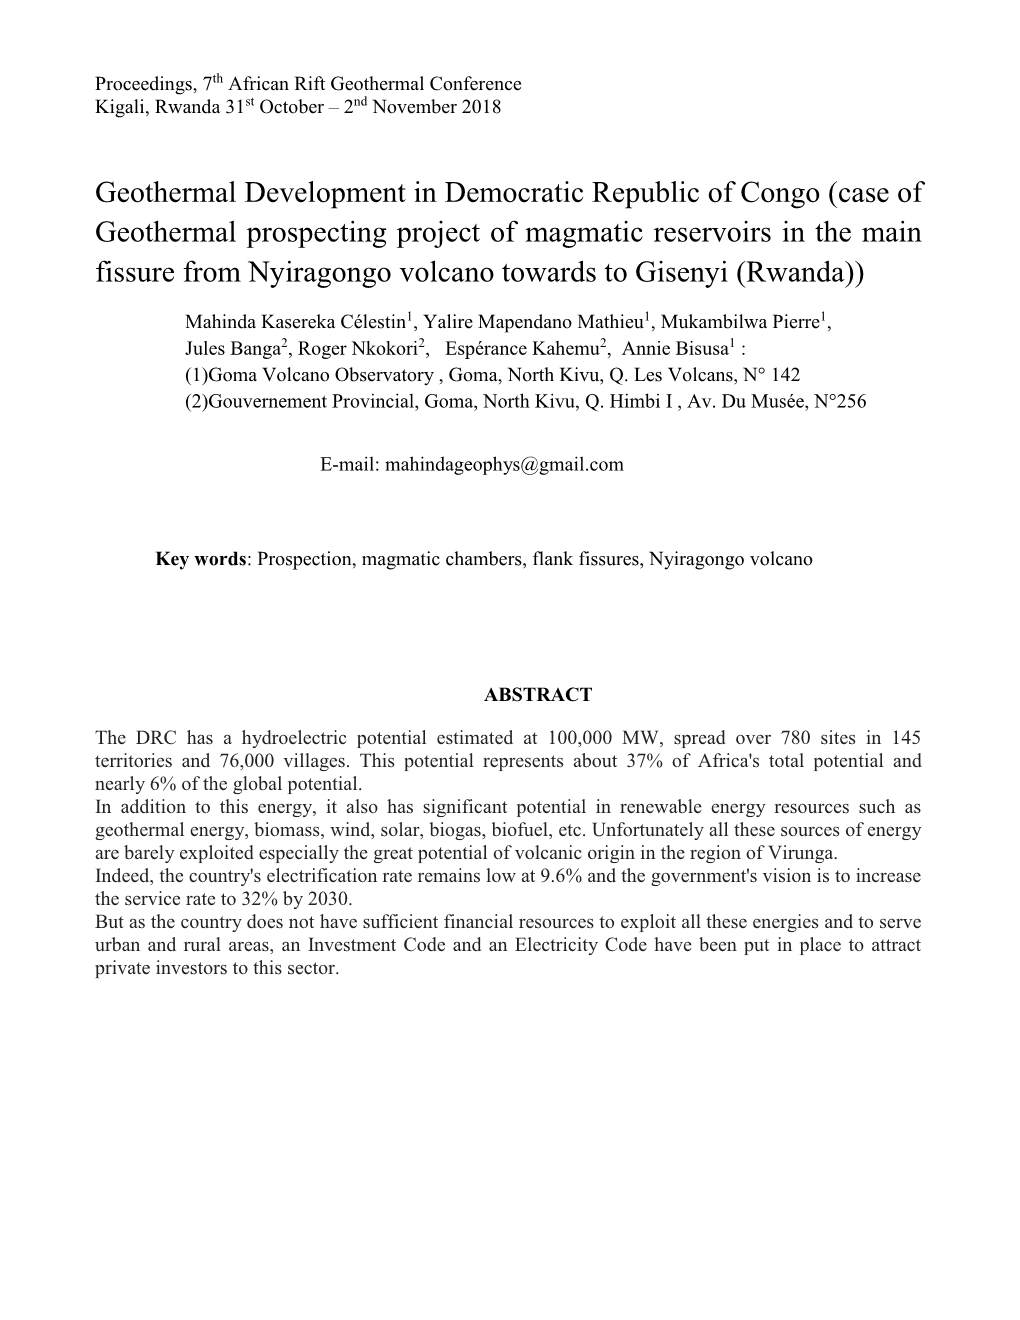 Geothermal Development in Democratic Republic of Congo (Case of Geothermal Prospecting Project of Magmatic Reservoirs in The